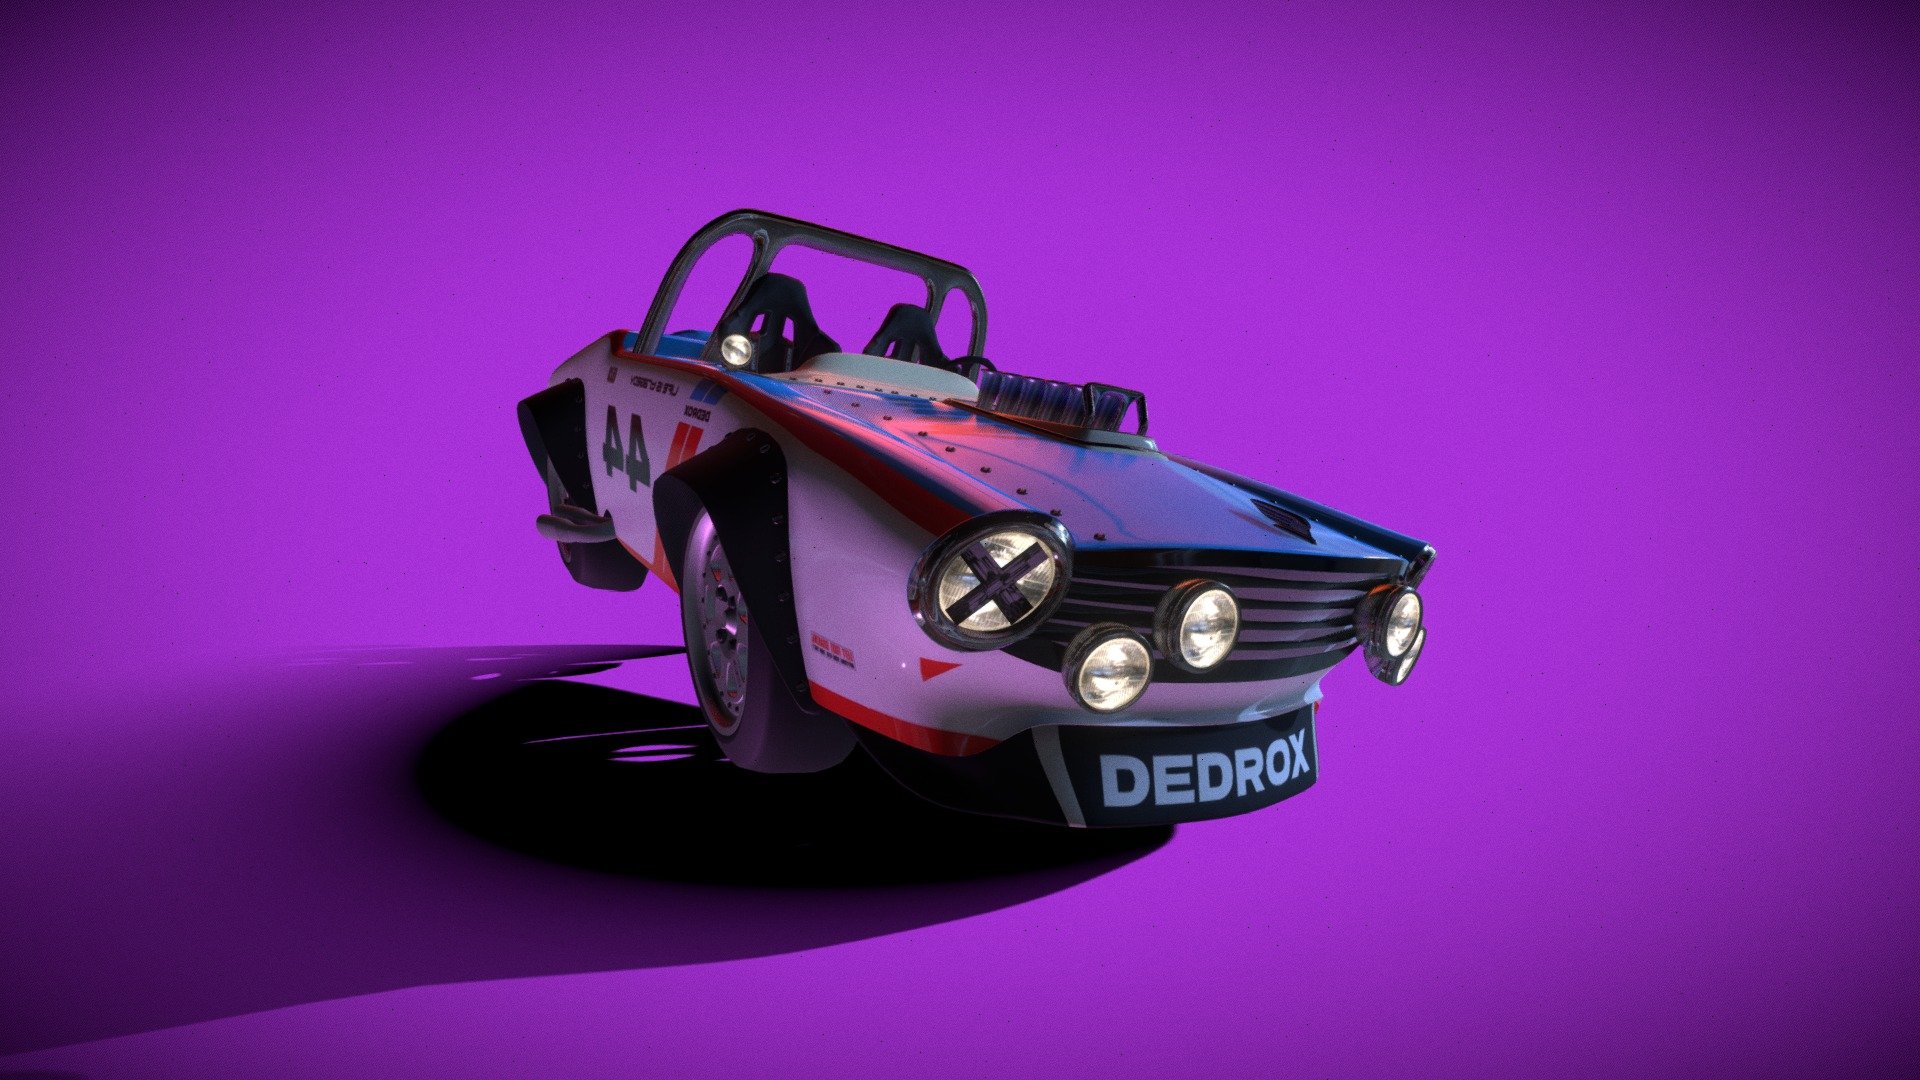 Making a car in blender has become a satisfying part and this newyear i learnt it and made this vintage old looking car with some caricature element to it. It maybe game ready. But if you want a even more lowpoly version. hitme up on insta: https://www.instagram.com/dedrox__/

Rendered videoof this car in:https://www.instagram.com/p/Cmy6QEgIuM1/
My precious artstaion: https://www.artstation.com/raghavprasanna - Forerunner cartoon toy mini free car - Download Free 3D model by DEDROX (@Raghavprasanna) 3d model